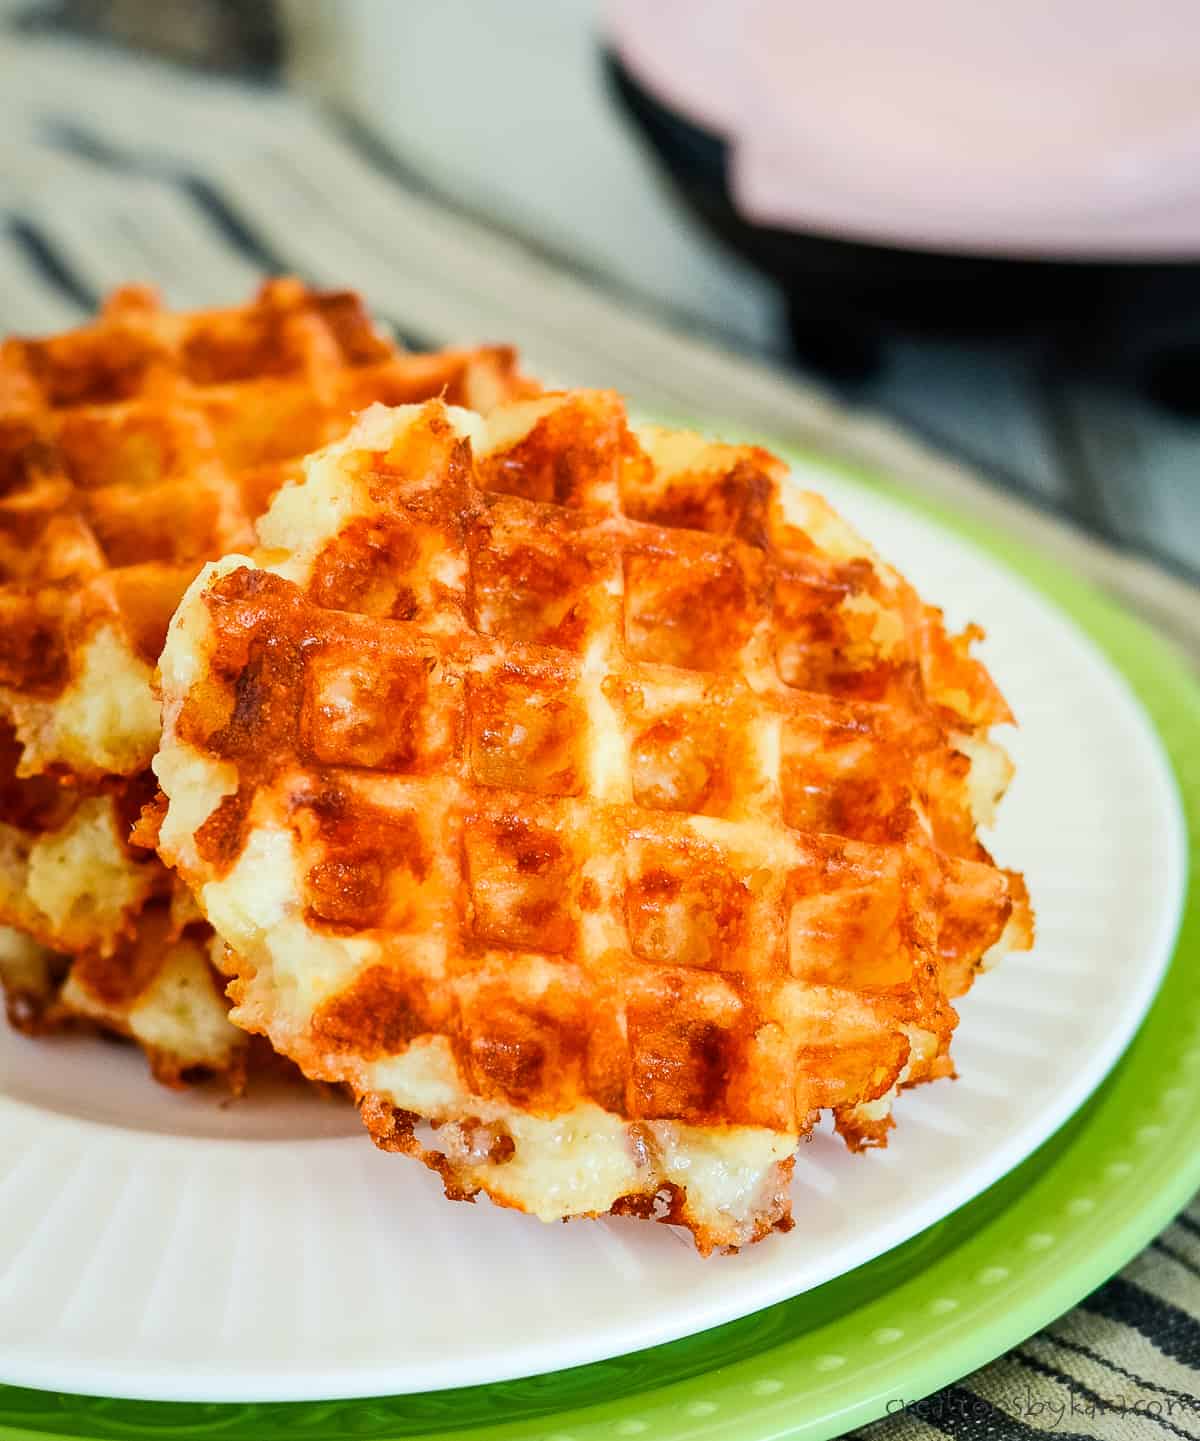 7 Things You Need to Know to Make the Best Chaffles!